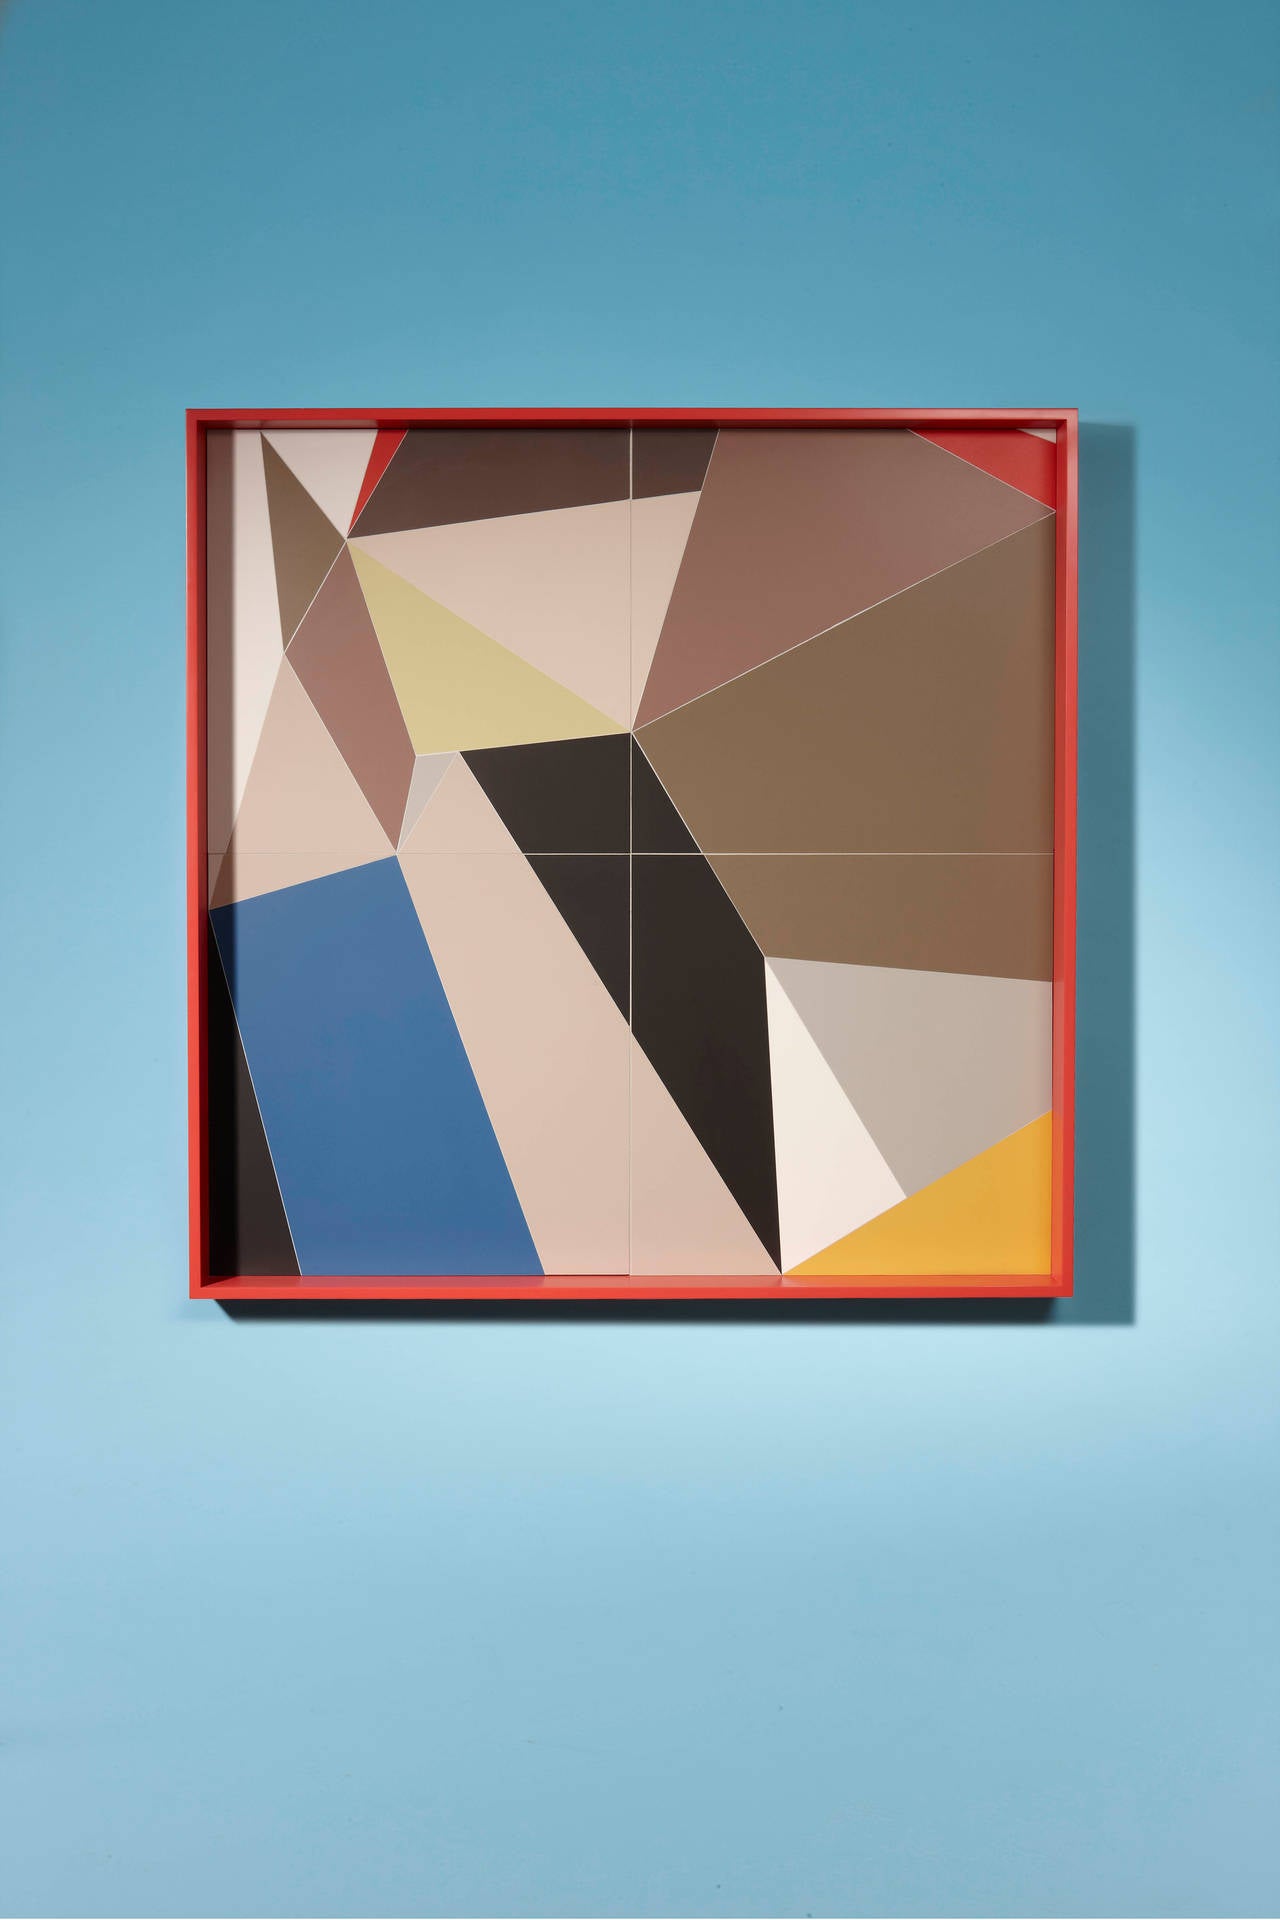 French Frame. Lacquered wood. Ceramic tiles.Christian Biecher, 